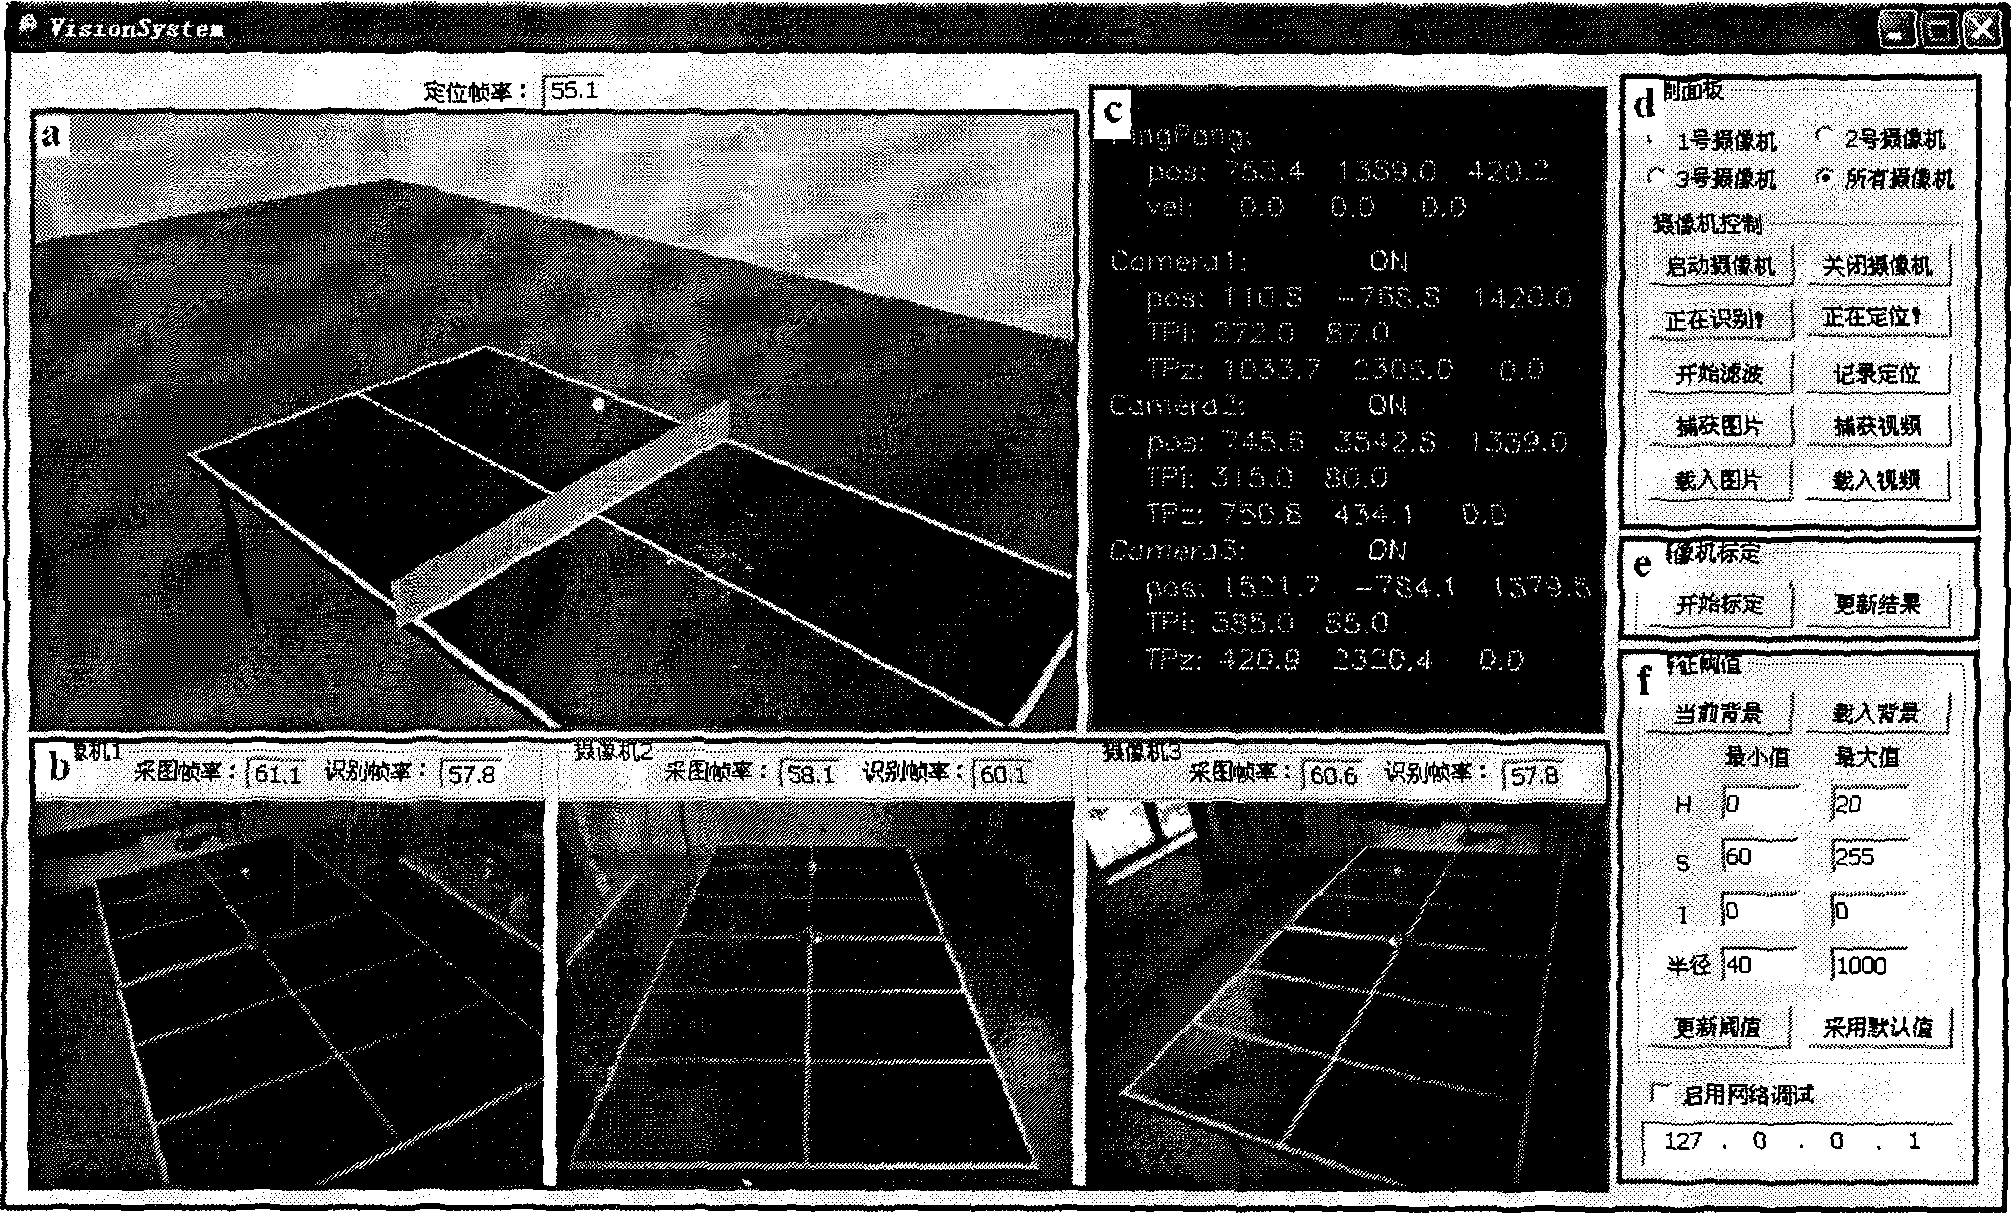 System for precision measuring and predicting table tennis track and system operation method